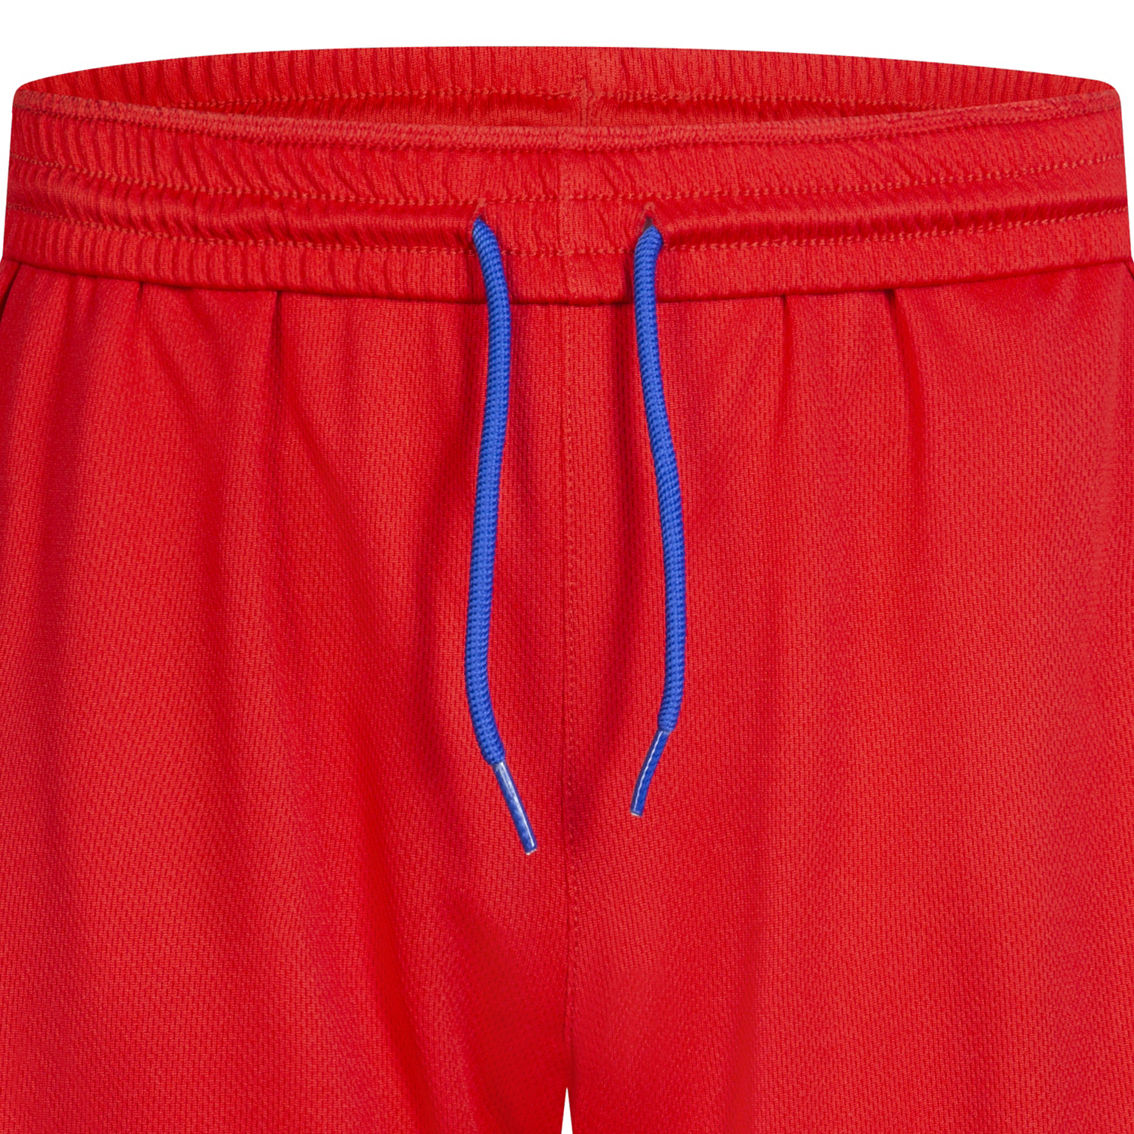 3BRAND by Russell Wilson Boys Essential Mesh Shorts - Image 4 of 5